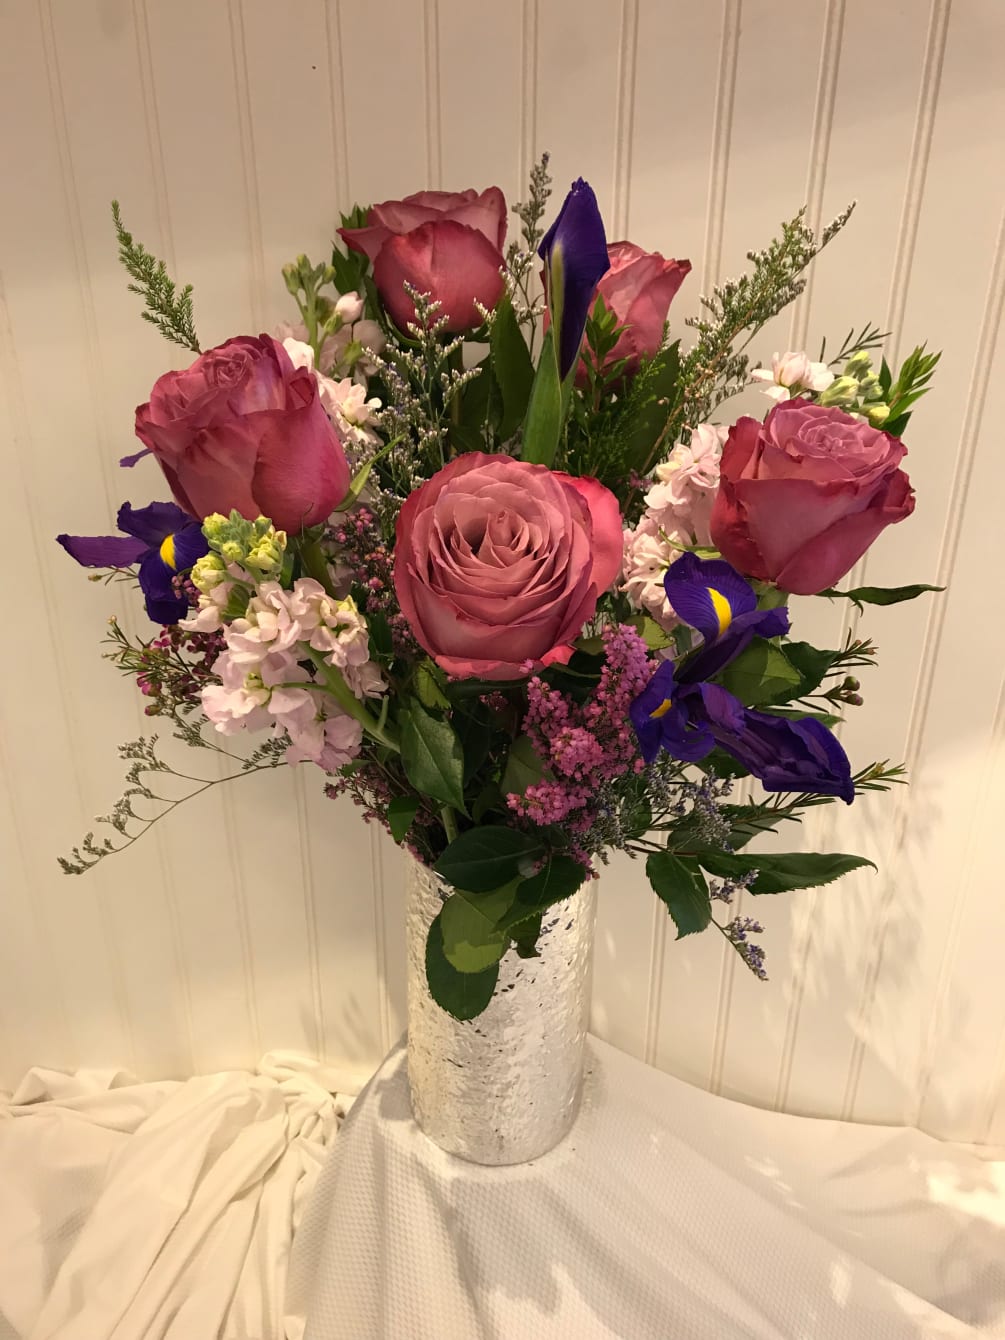 A classy silver vase filled with lovely lavender roses, stock, purple iris